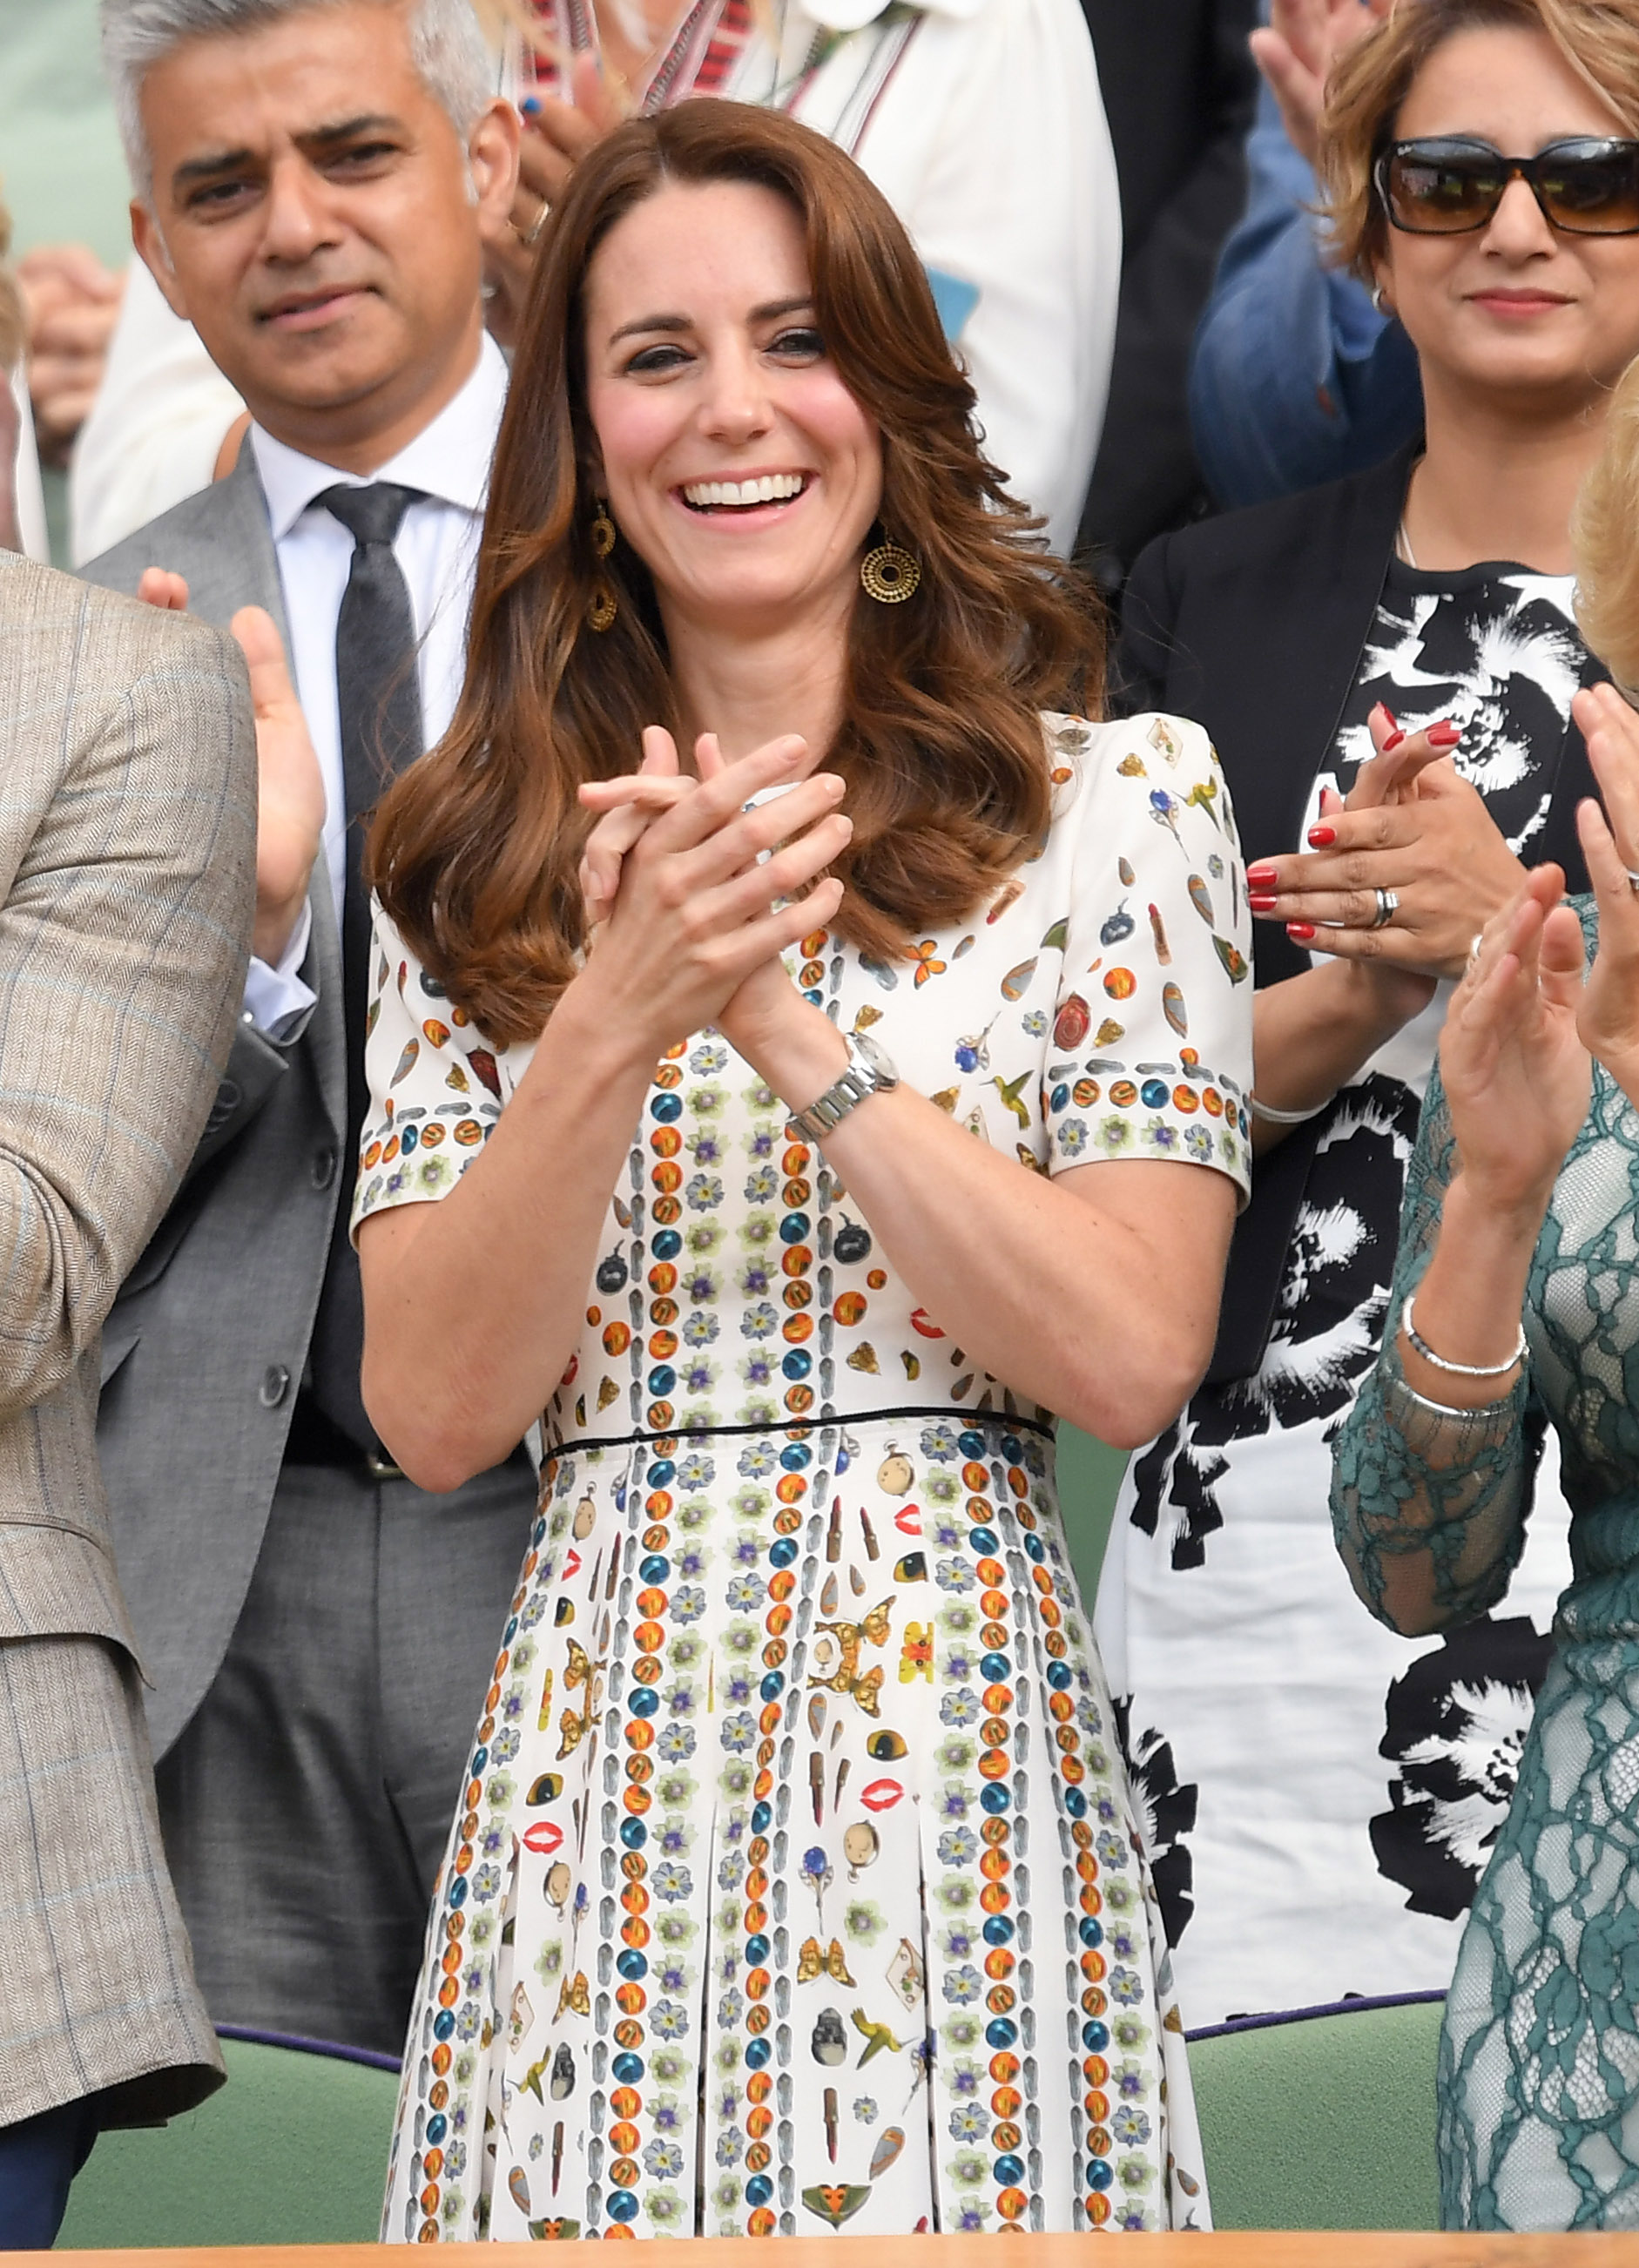 Catherine, Duchess of Cambridge attends the Men's Final of the Wimbledon Tennis Championships between Milos Raonic and Andy Murray at Wimbledon in London on July 10, 2016.